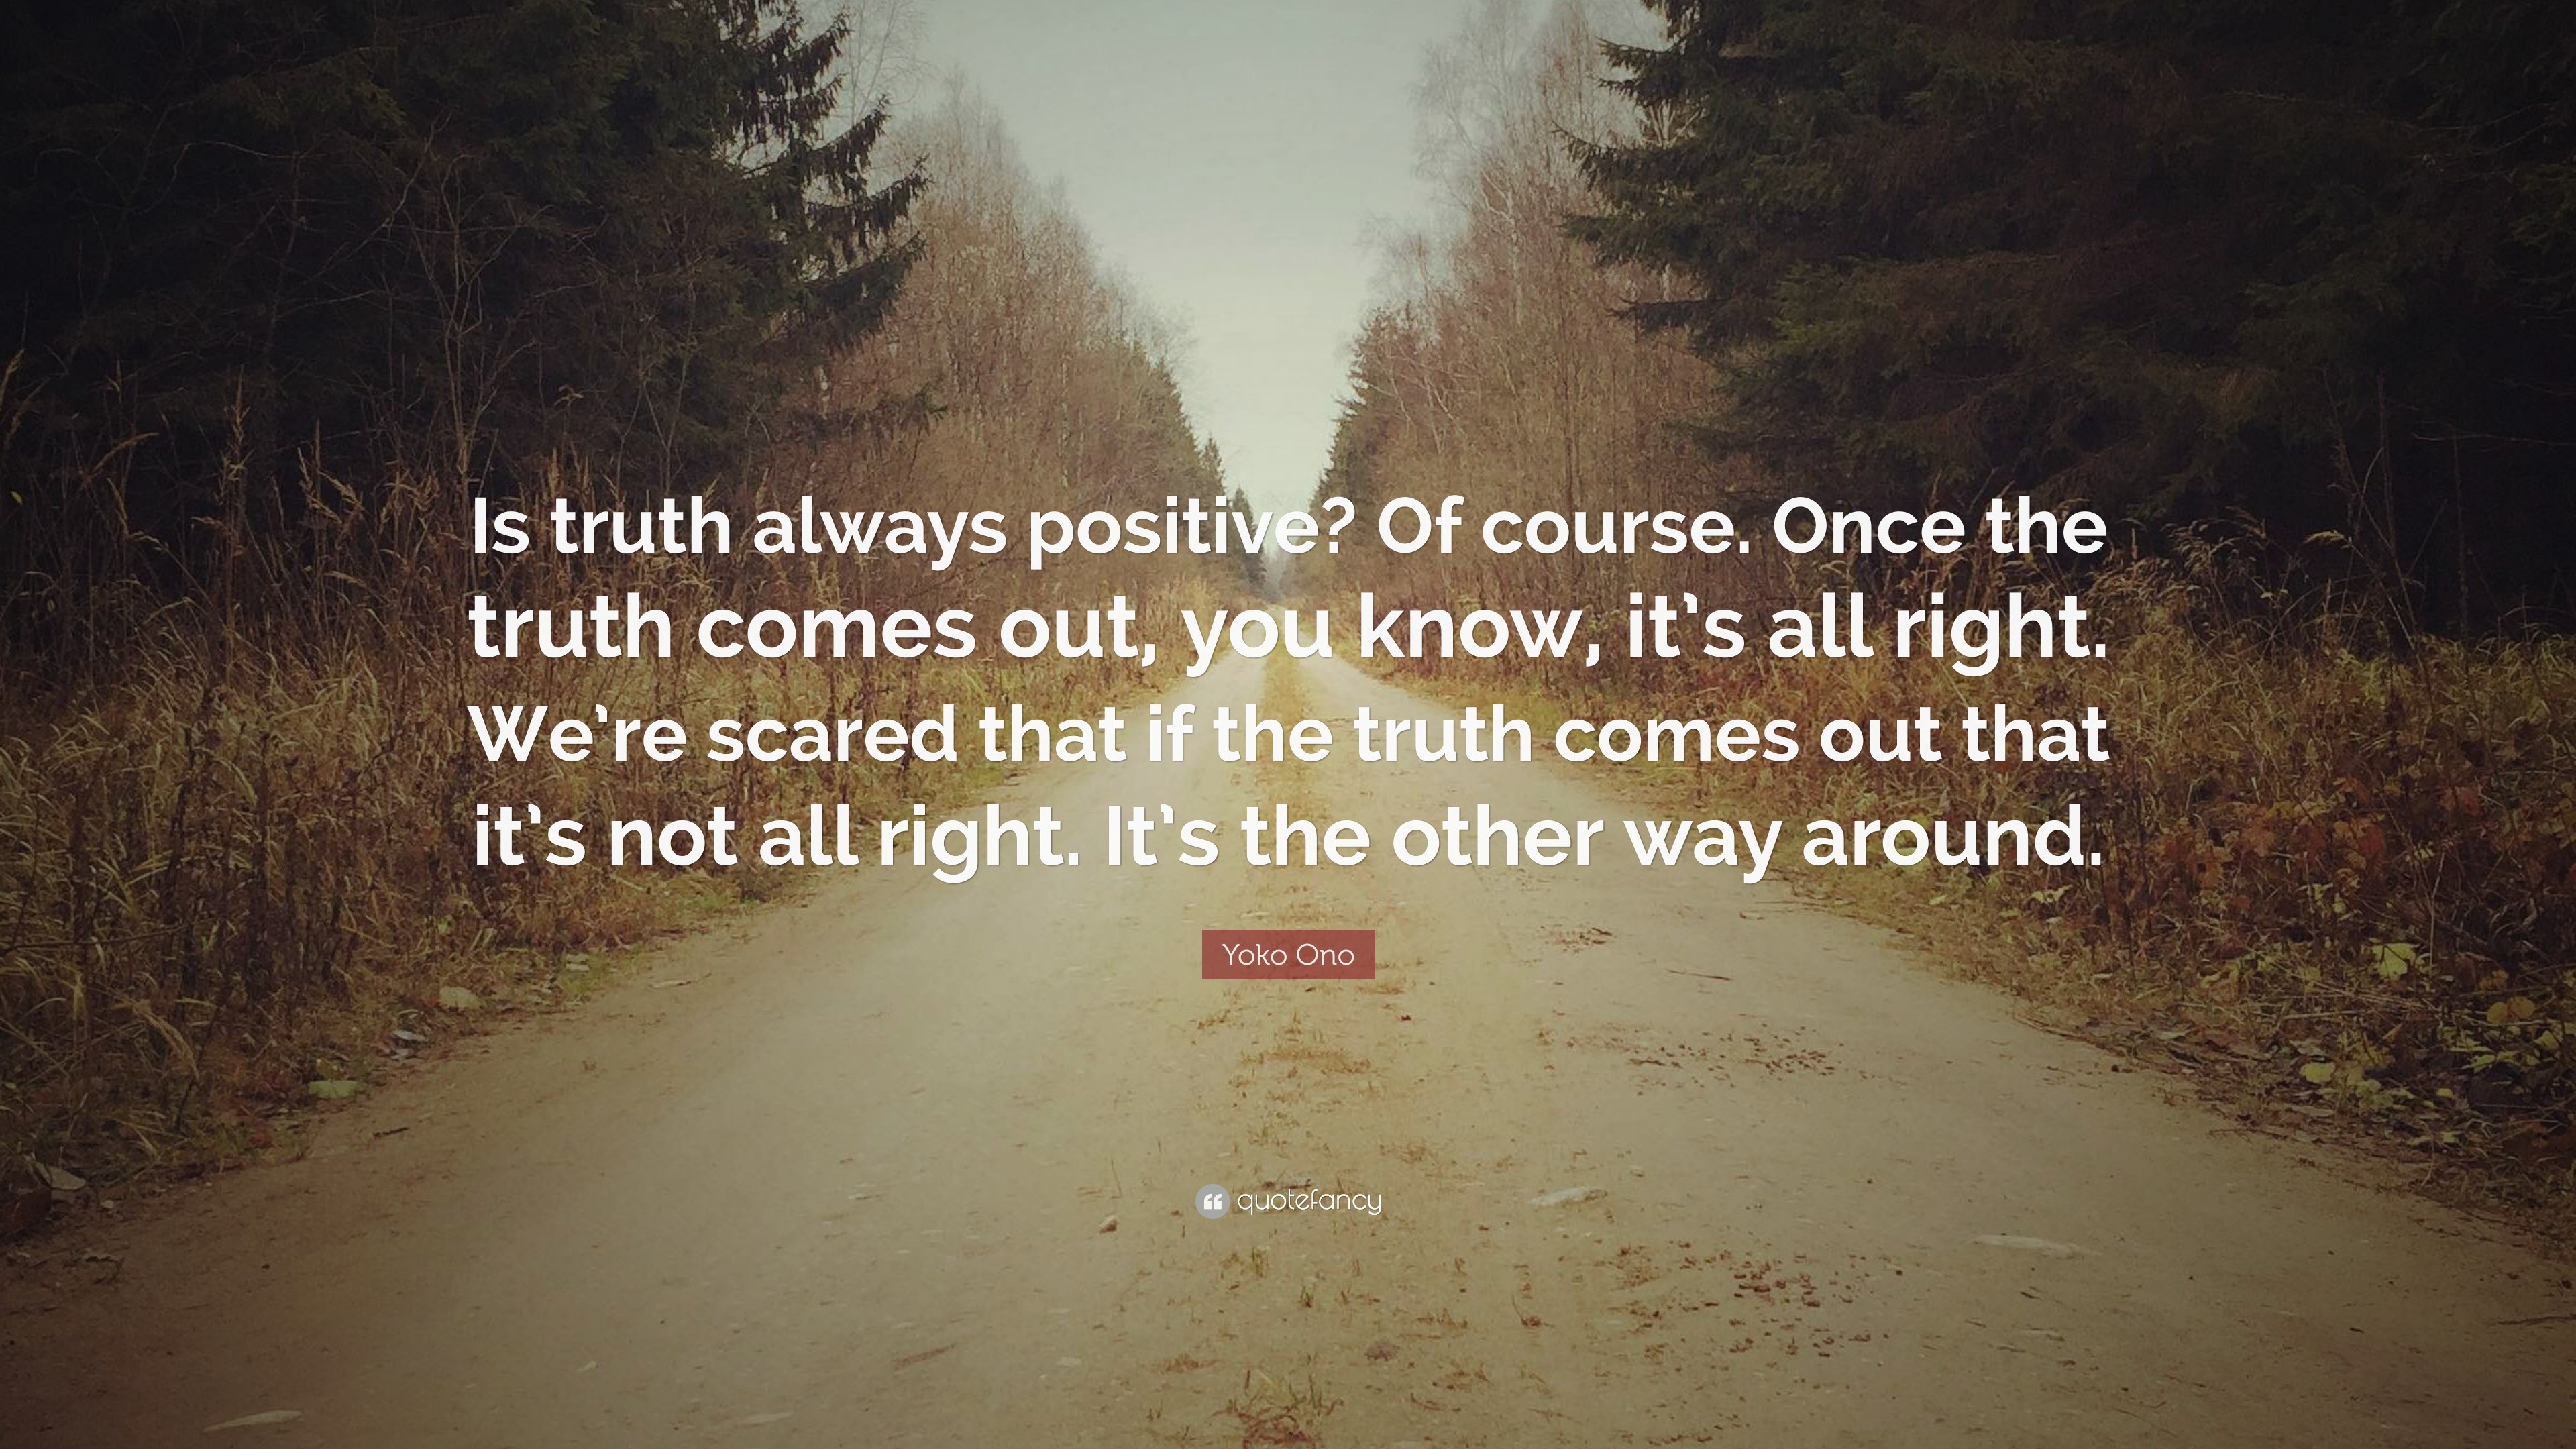 Yoko Ono Quote: "Is truth always positive? Of course. Once ...